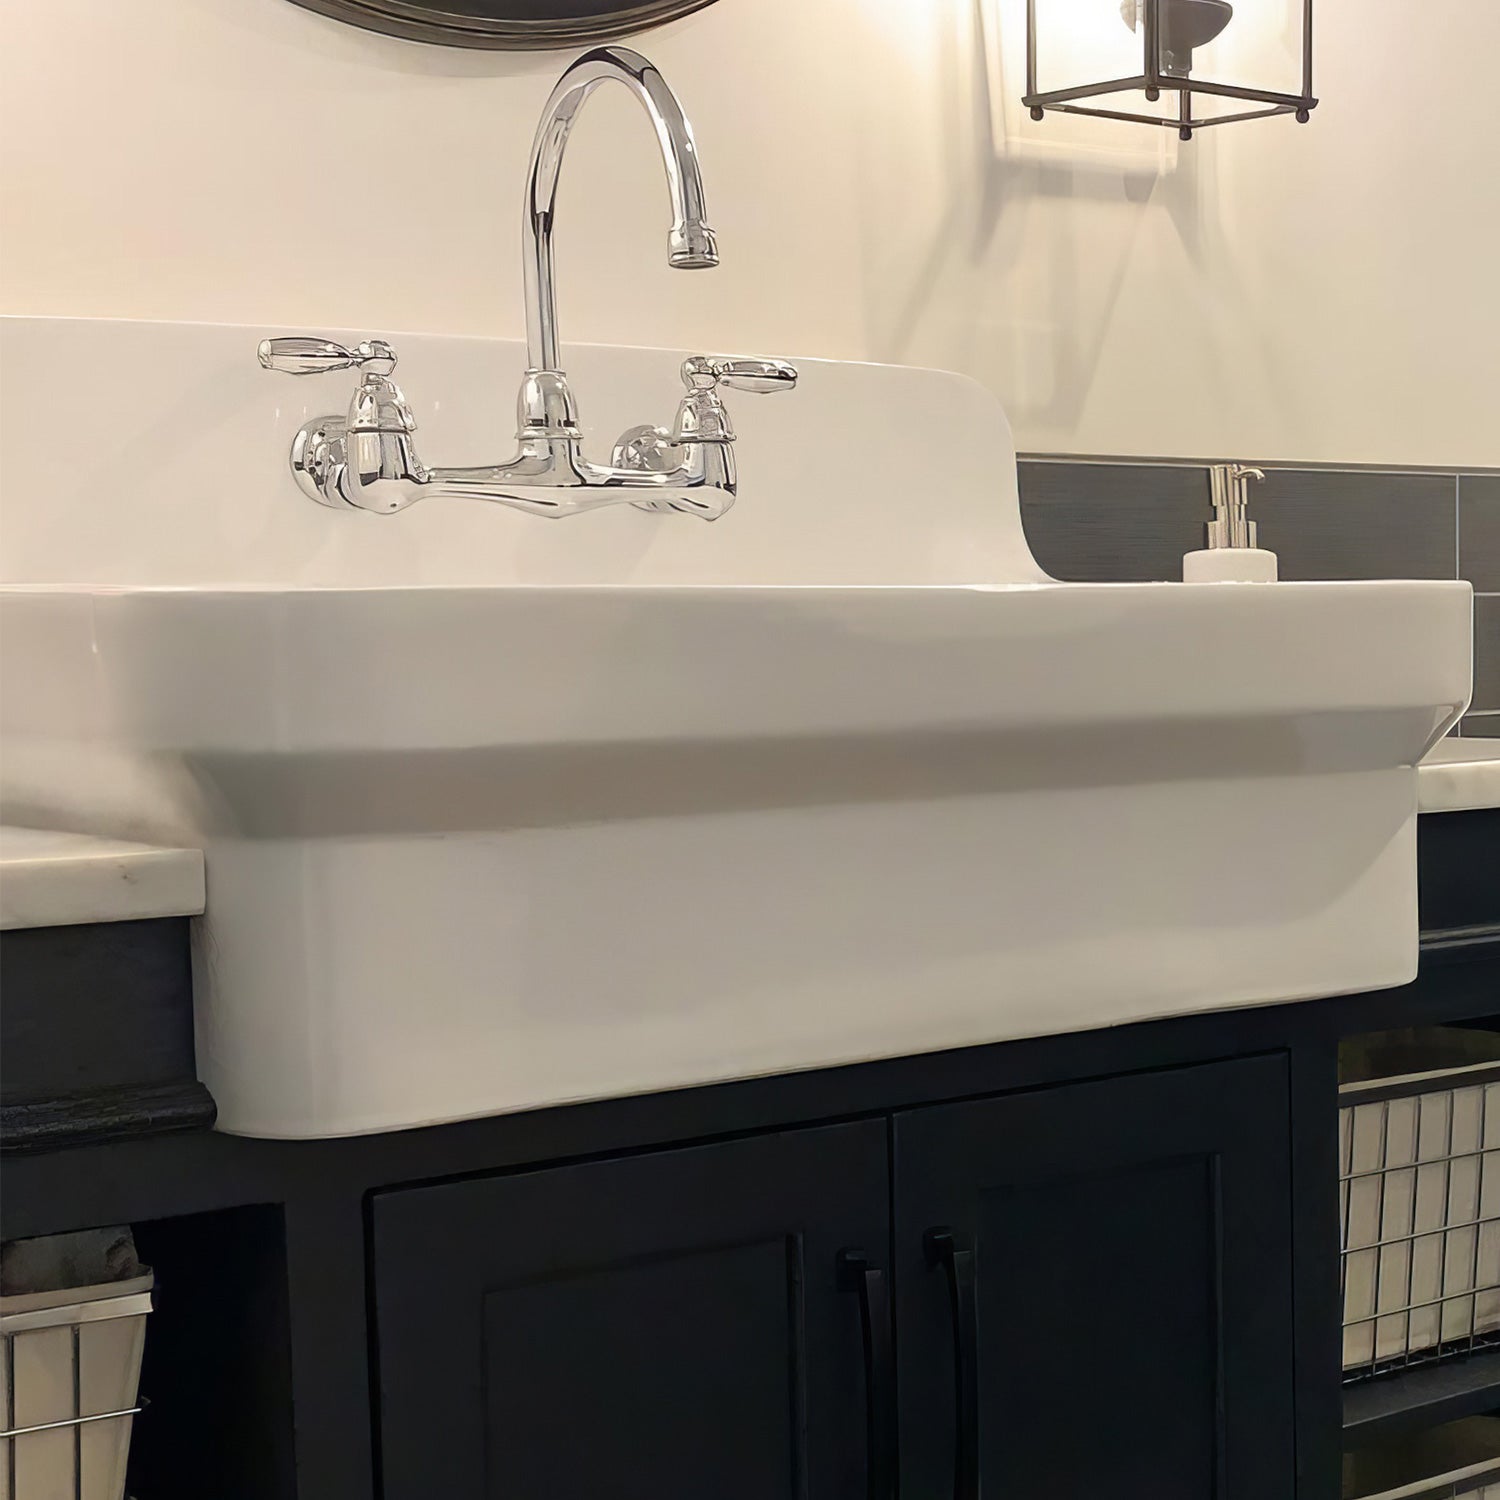 30" Fireclay kitchen/utility sink with high back splash and faucet drilling